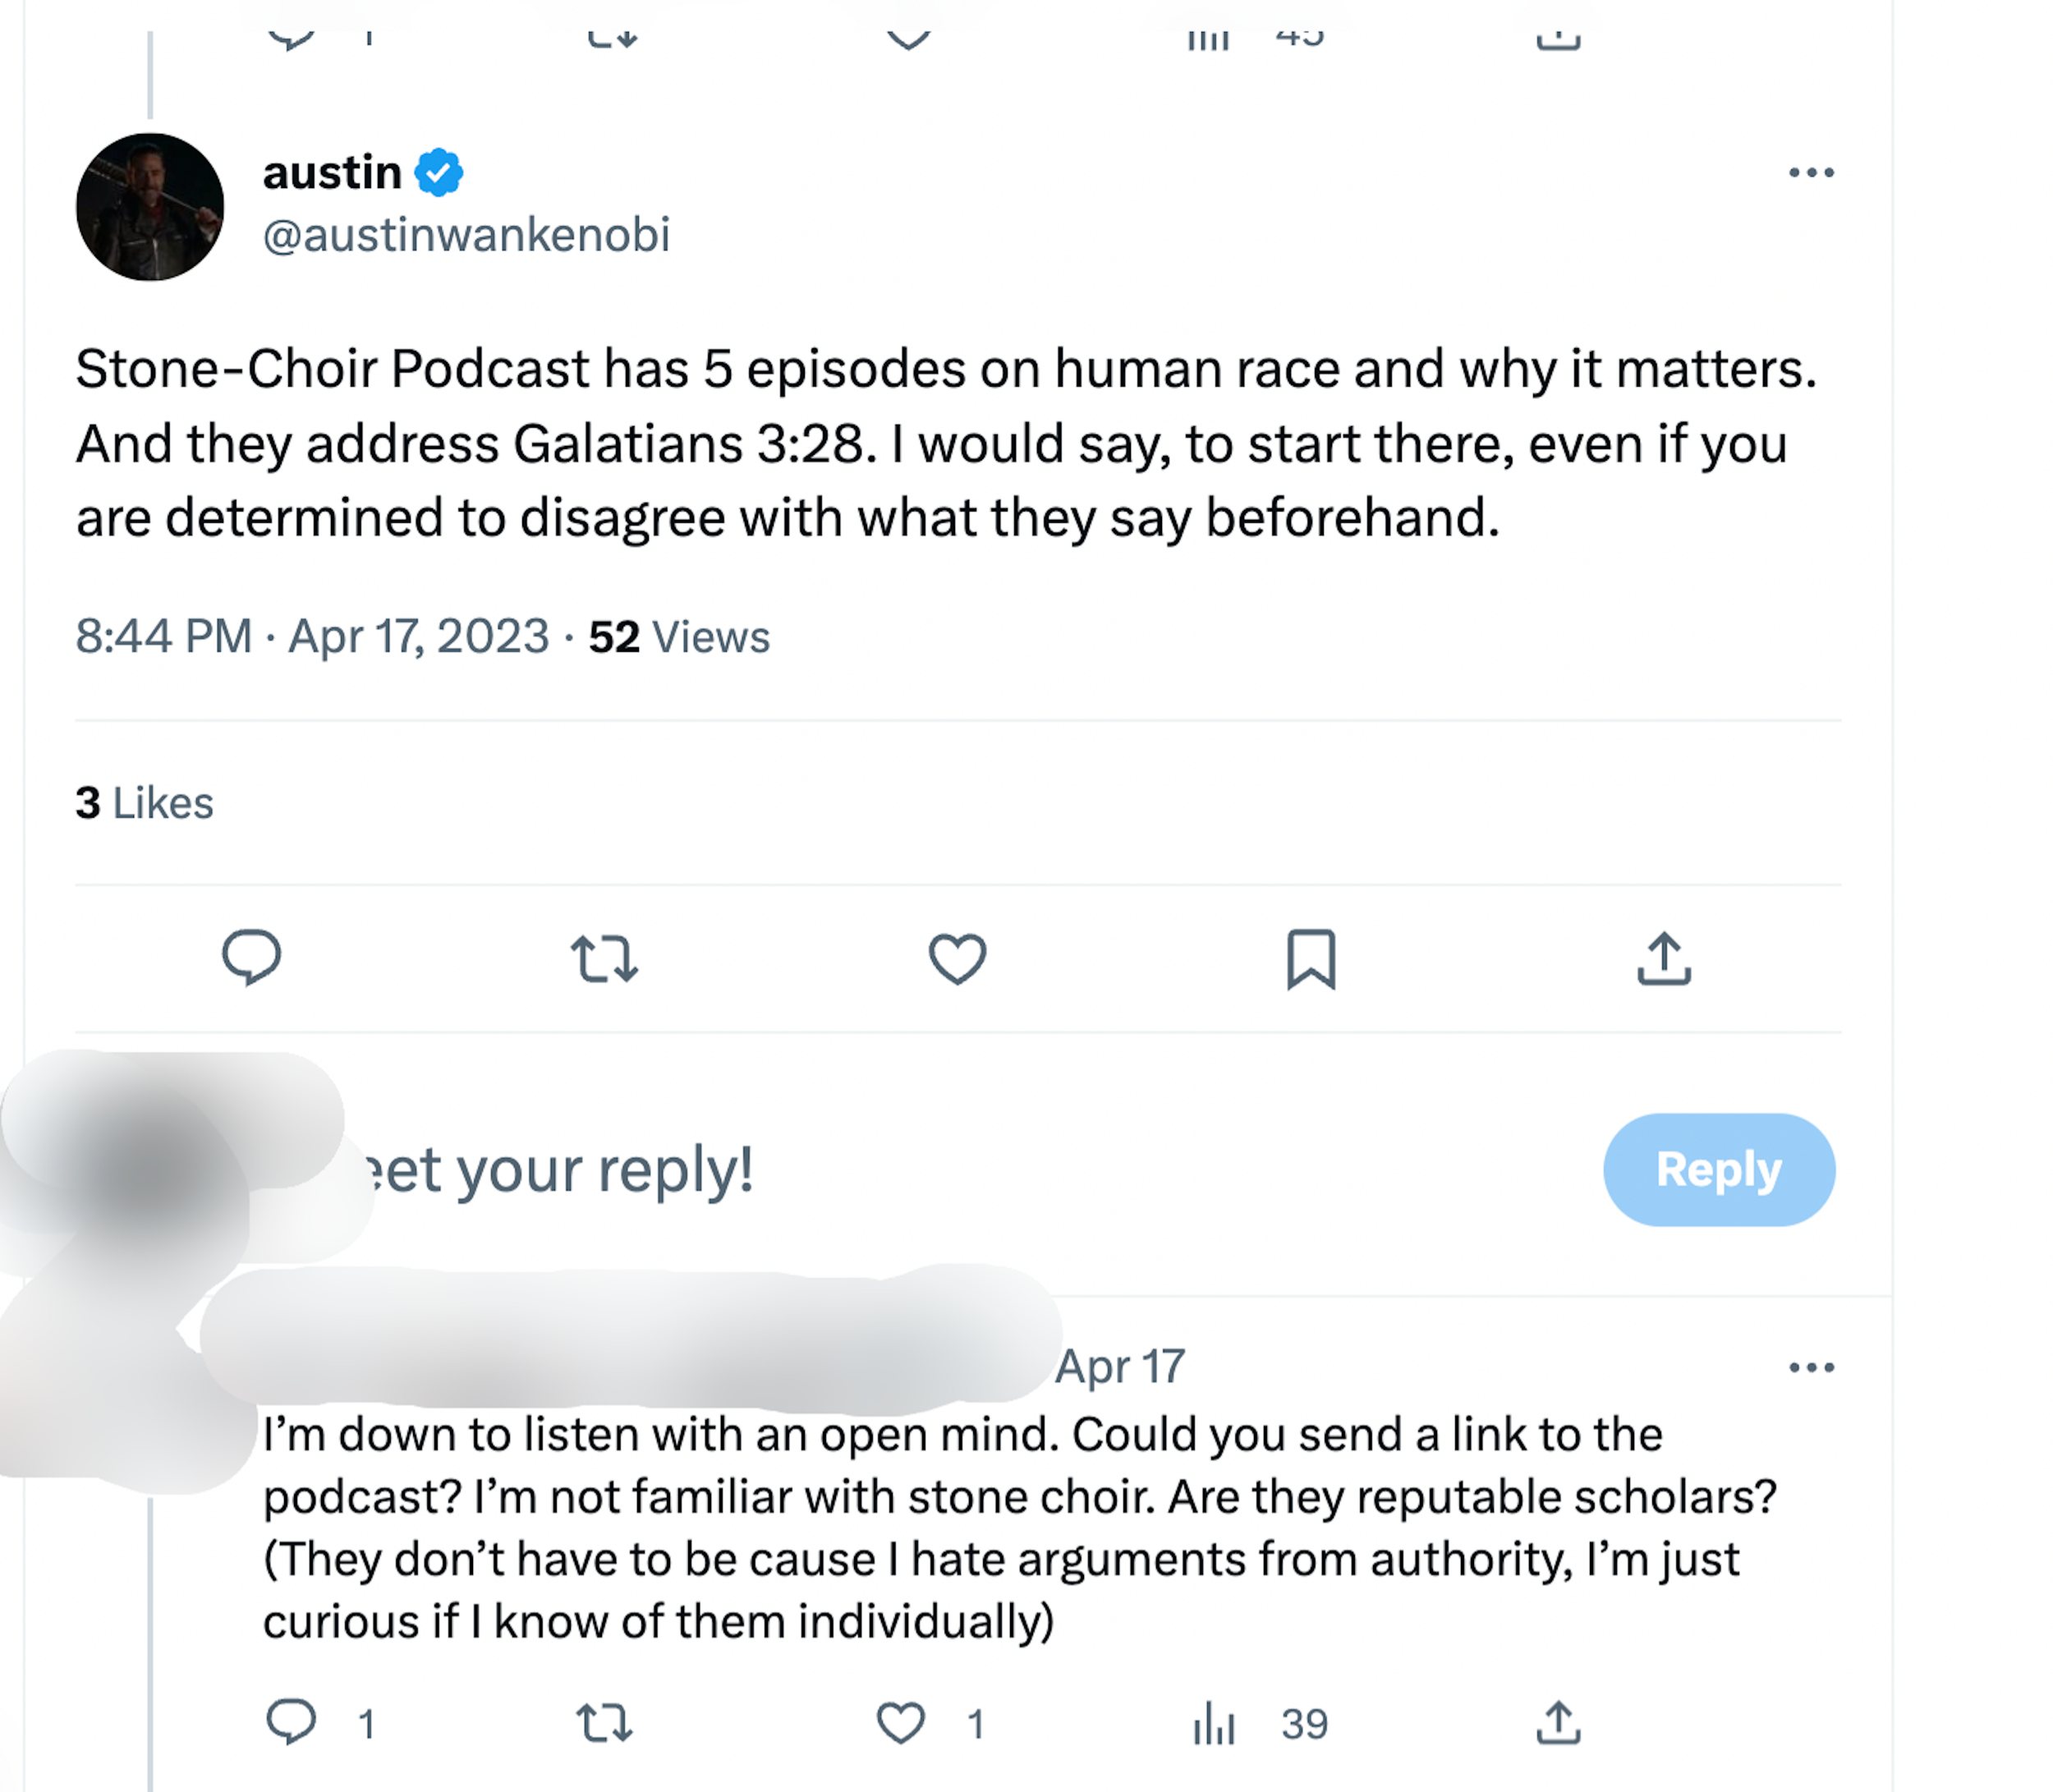 AustinwanKenobi: "Stone-Choir Podcast has 5 episodes on human race and why it matters. And they address Galatians 3:28. I would say, to start there, even if you are determined to disagree with what they say beforehand." REply: "I'm down to listen with an open mind. Could you send a link to the podcast? I'm not familiar with stone choir. Are they reputable scholars? They don't have to be because I hate arguments from authority. I'm just curious if I know any of them individually"